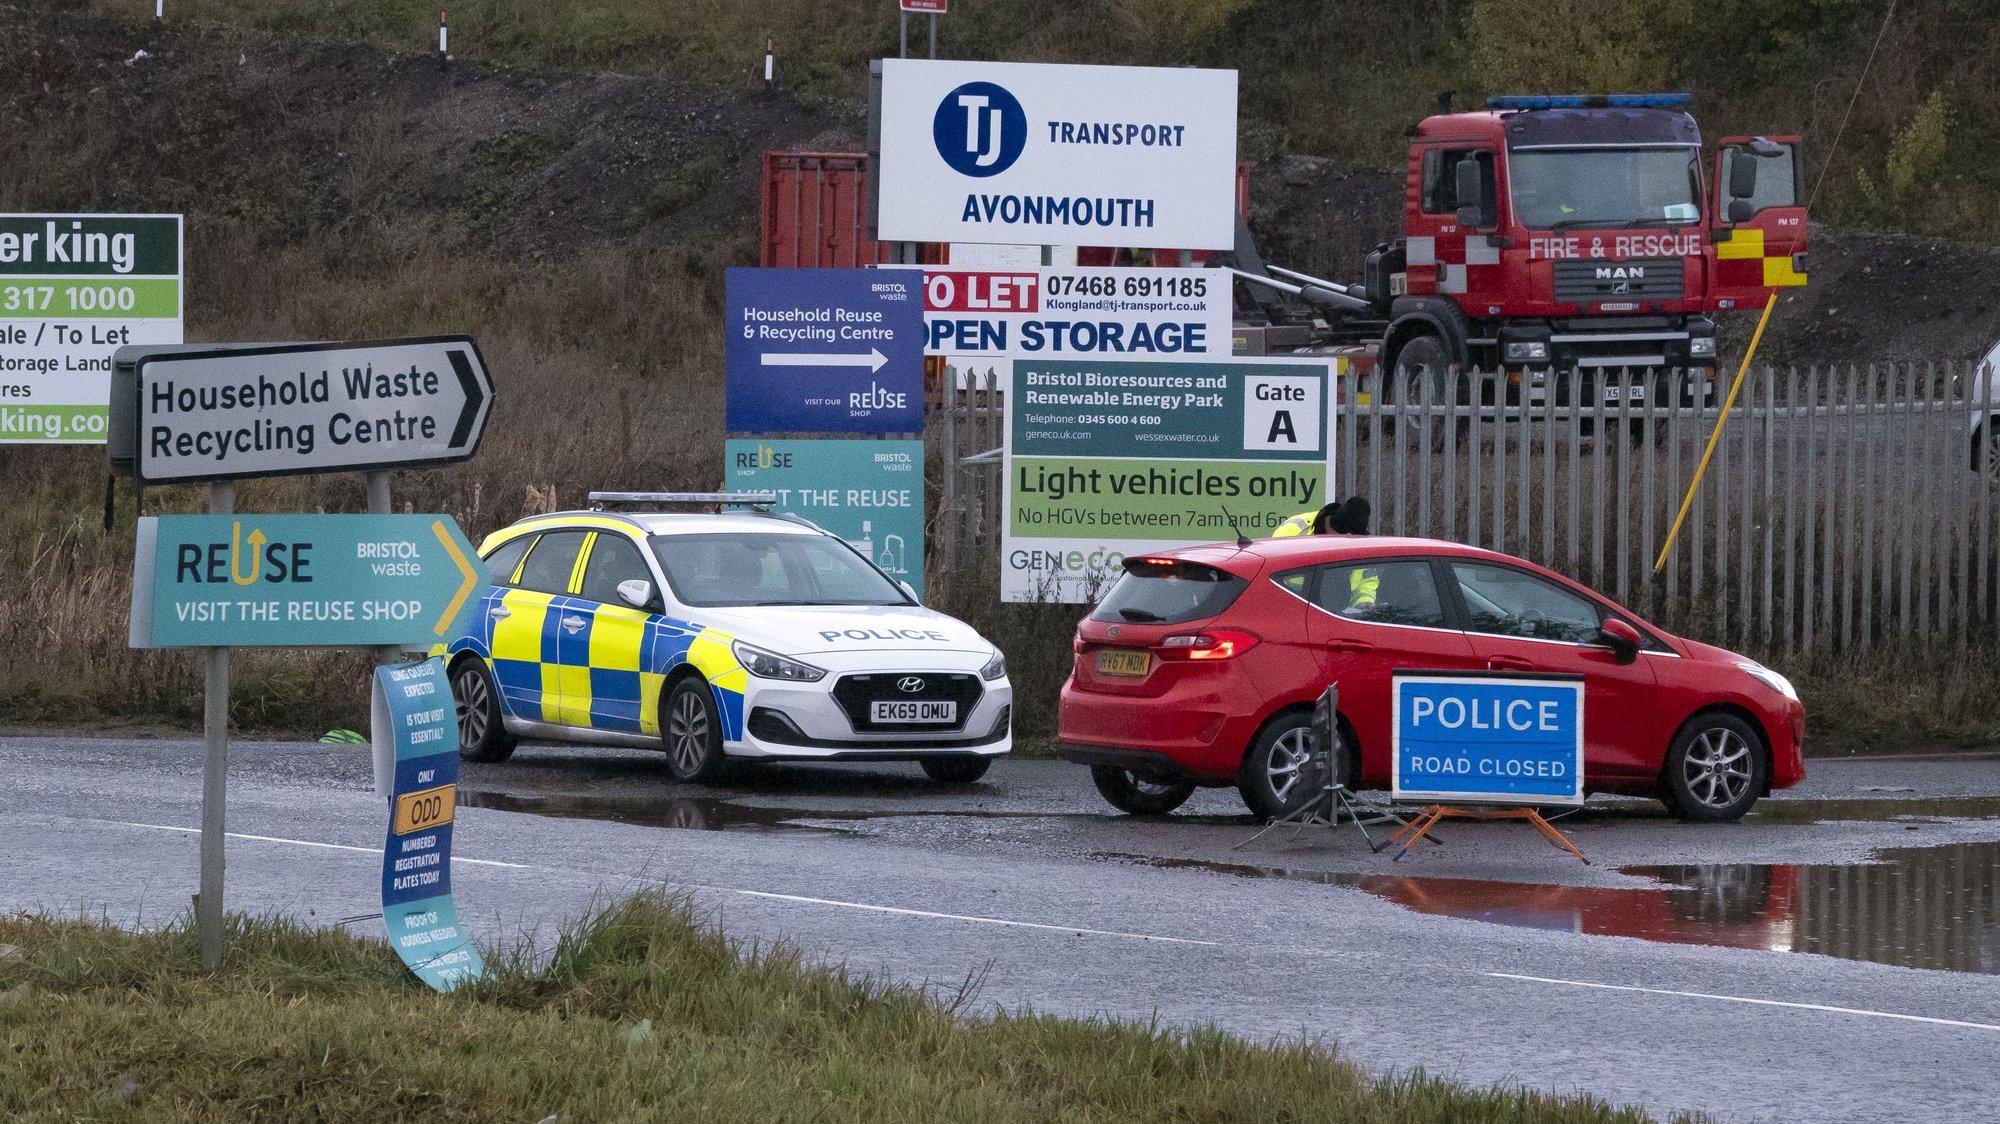 epa08859584 Emergency services at the site of the explosion Avonmouth, Bristol, Britain, 03 December 2020. According to reports, there have been multiple casualties and that the search for survivors is ongoing after a huge blast in a sewage plant in Avonmouth.  EPA/STRINGER